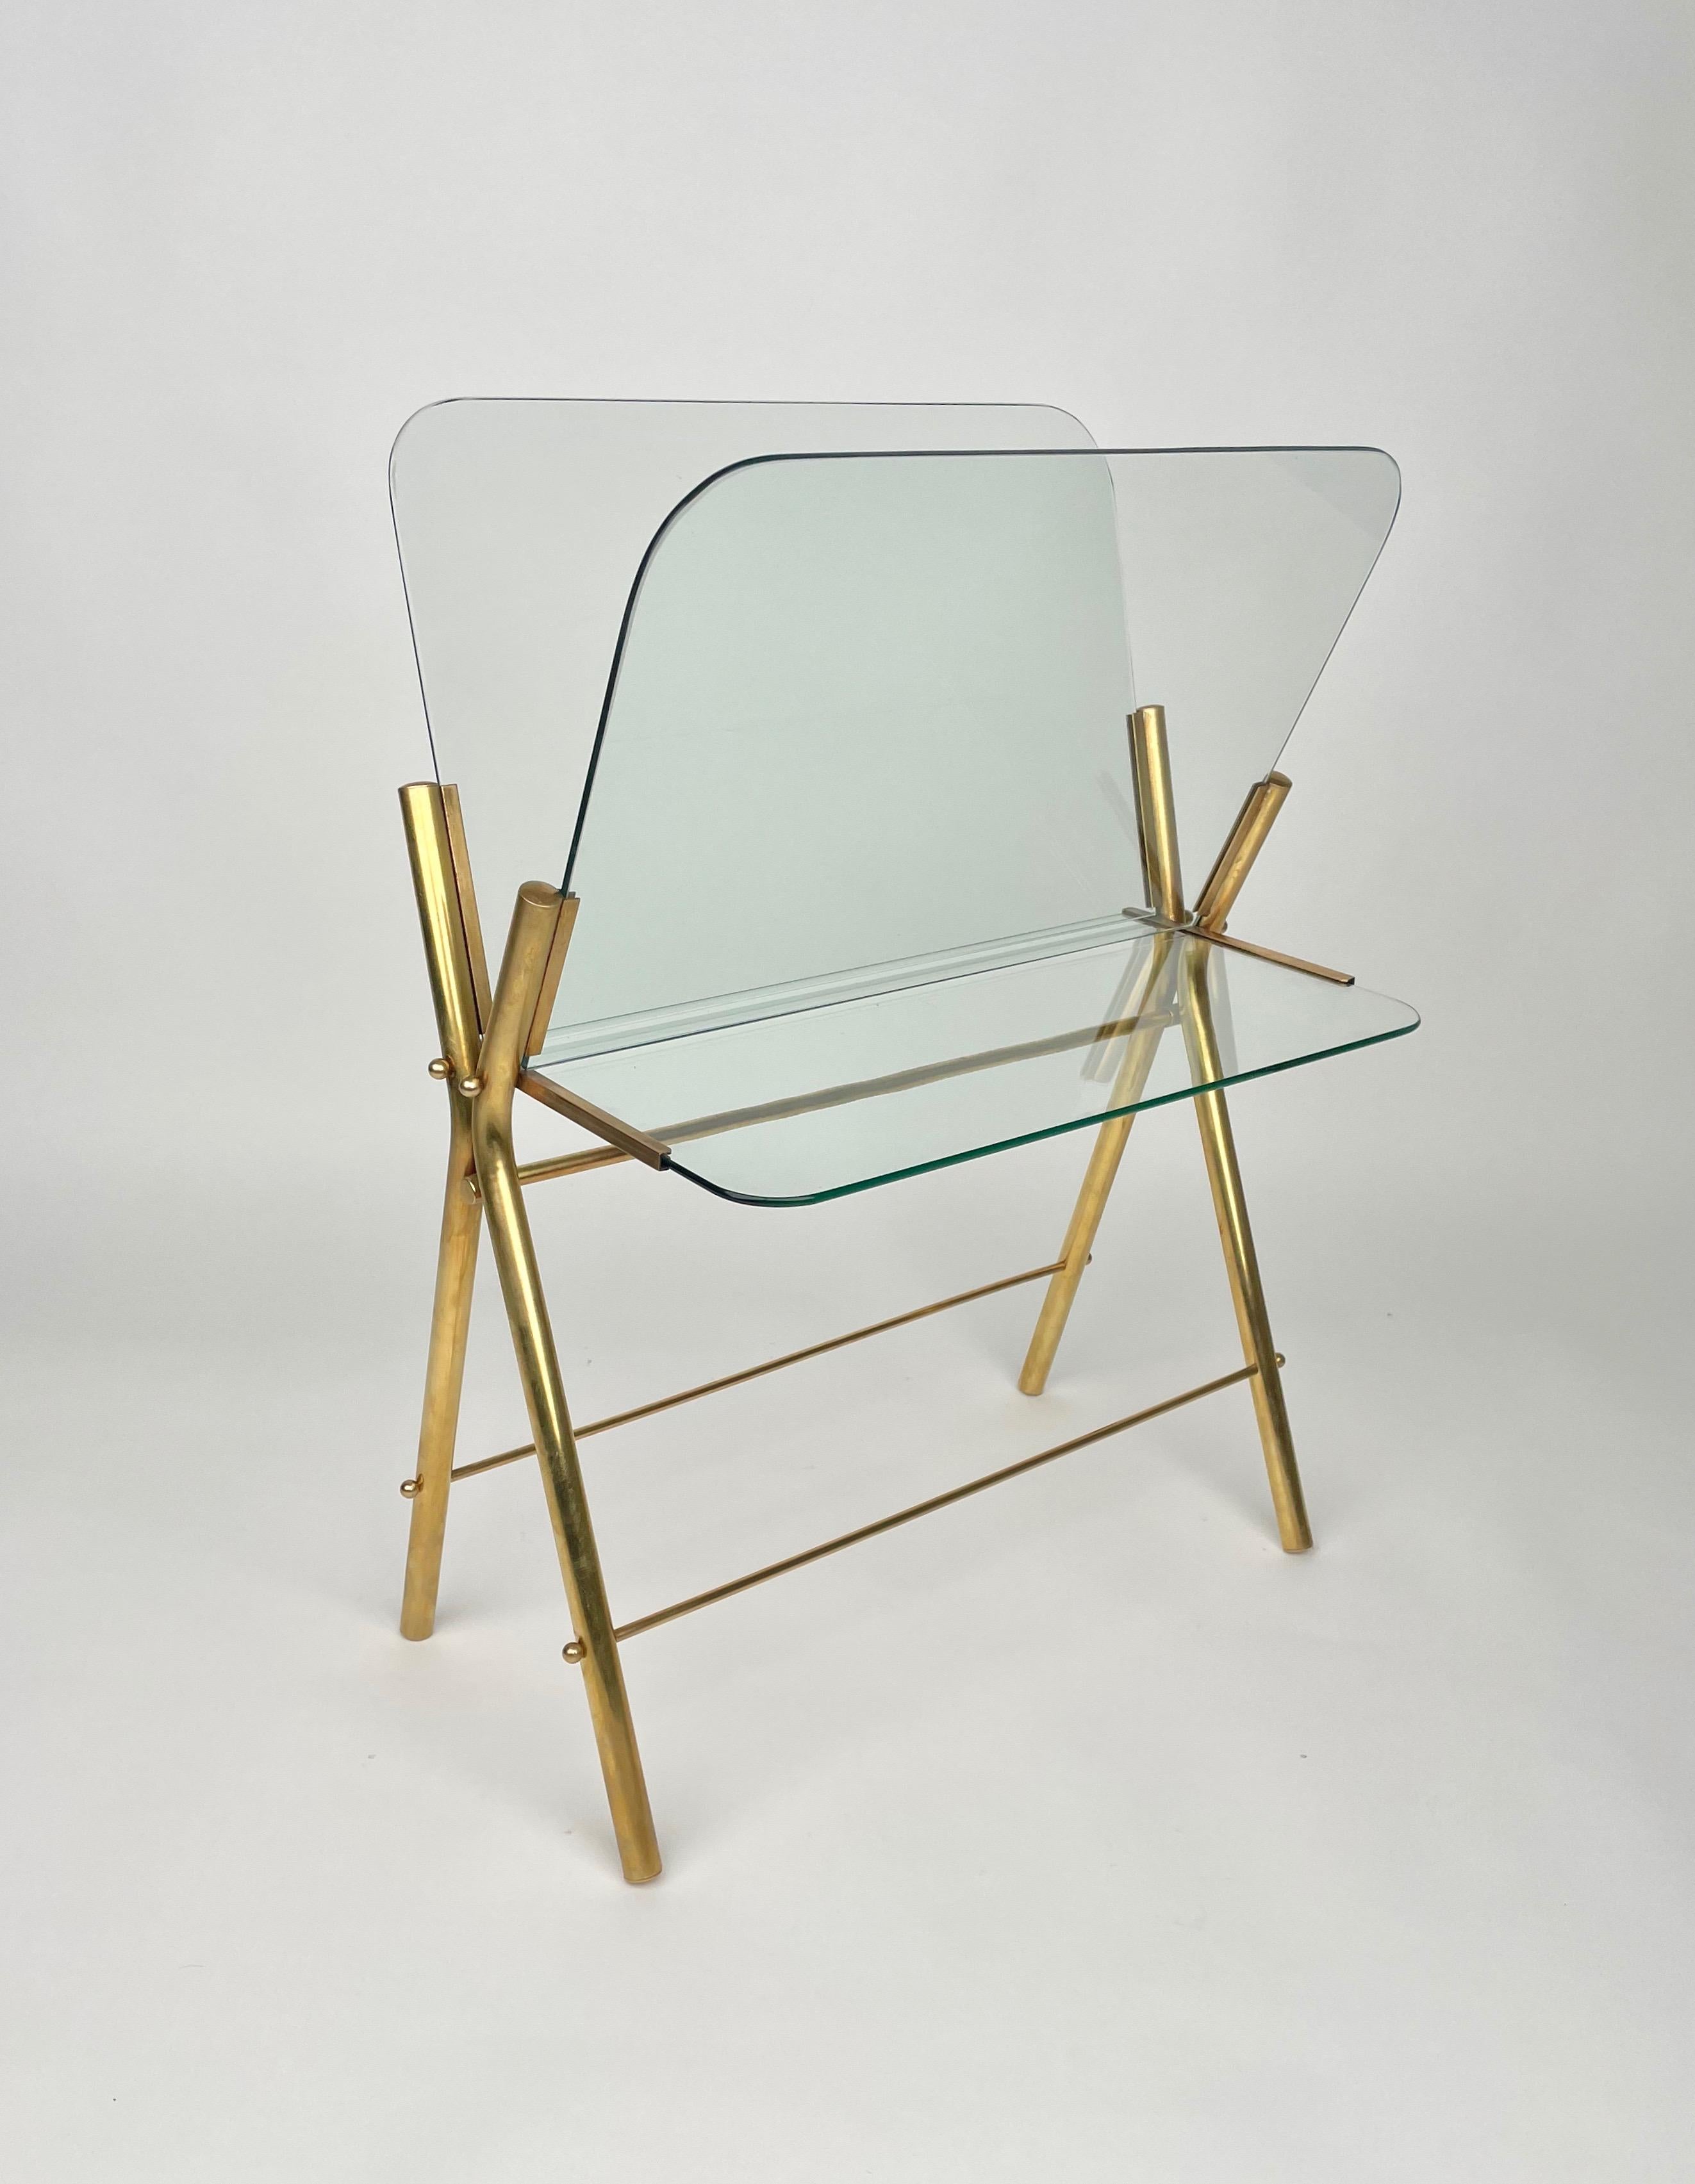 Magazine rack stand in a brass and glass structure which can also be used as a table as it features a glass shelf.

Made in Italy in the 1950s.